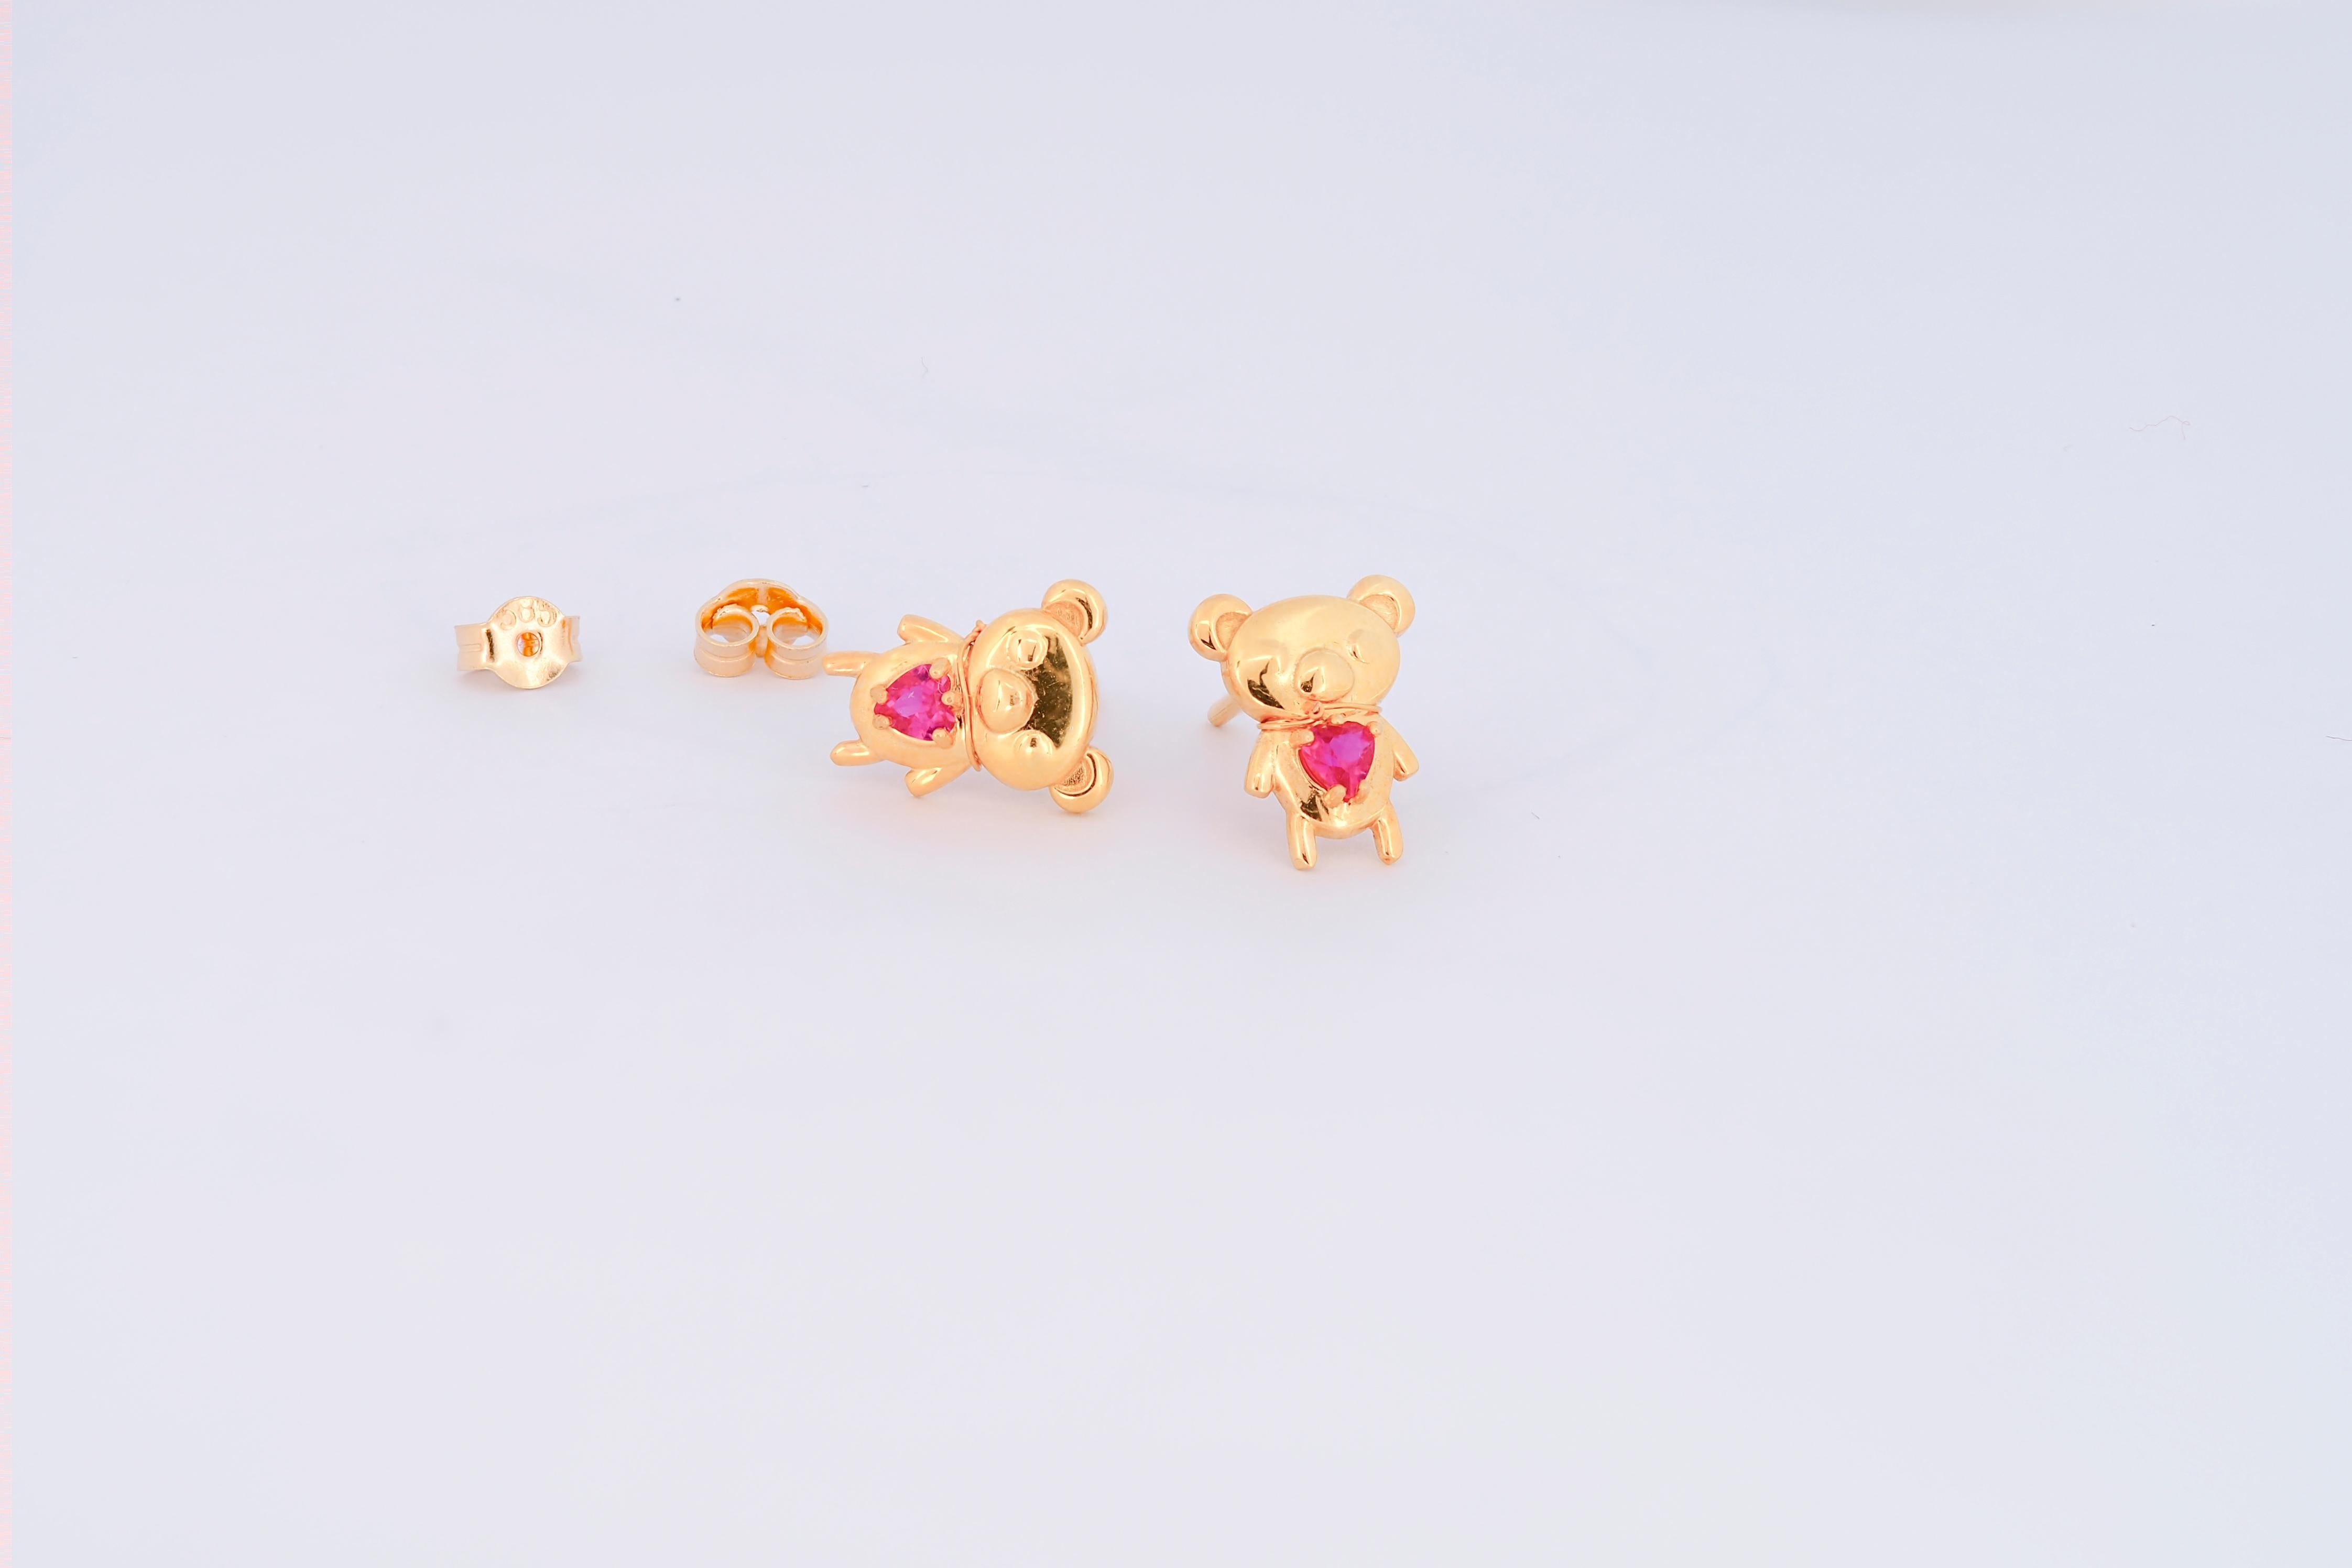 Teddy bear earrings studs in 14k gold. Puffed Gummy Pear Statement earrings with lab rubies. Love Care Symbol Gold earrings. Cute bear studs. Heart ruby studs.  

Metal: 14k gold
Pendant size:  10 x 7 mm
Weight: 1.7 gr
earrings goes with gold